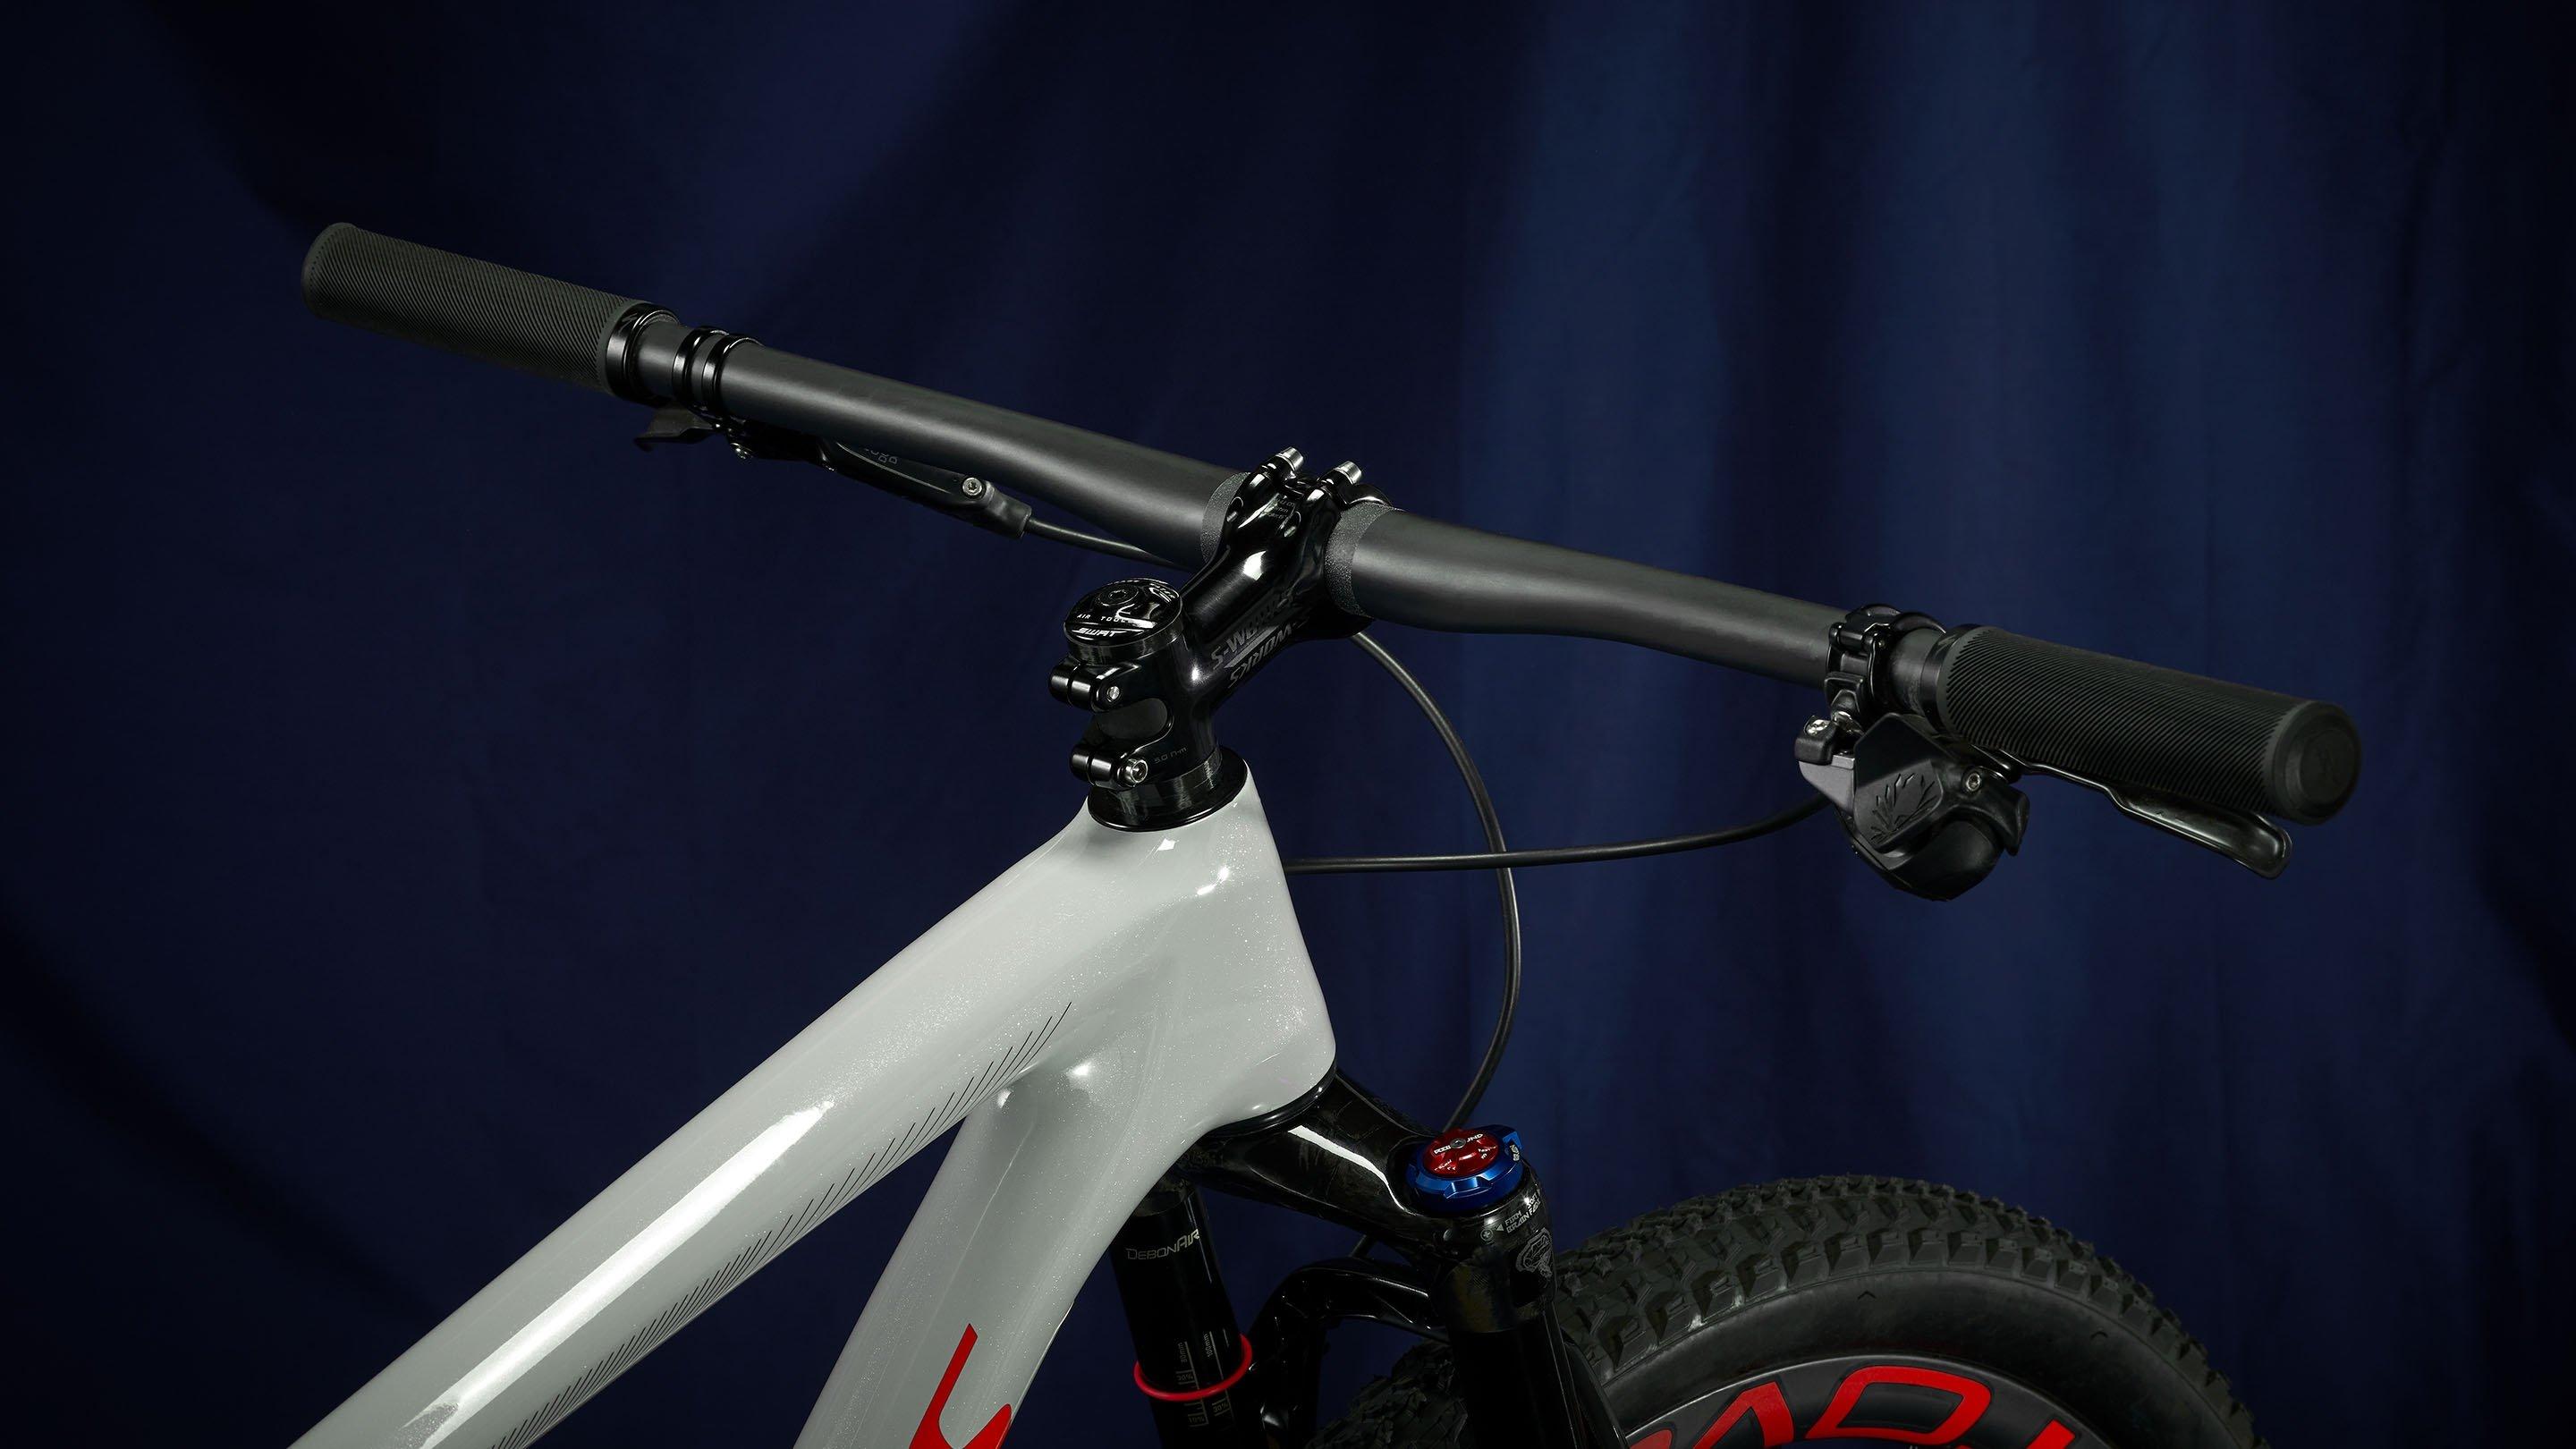 S-Works Epic Hardtail AXS | Specialized.com